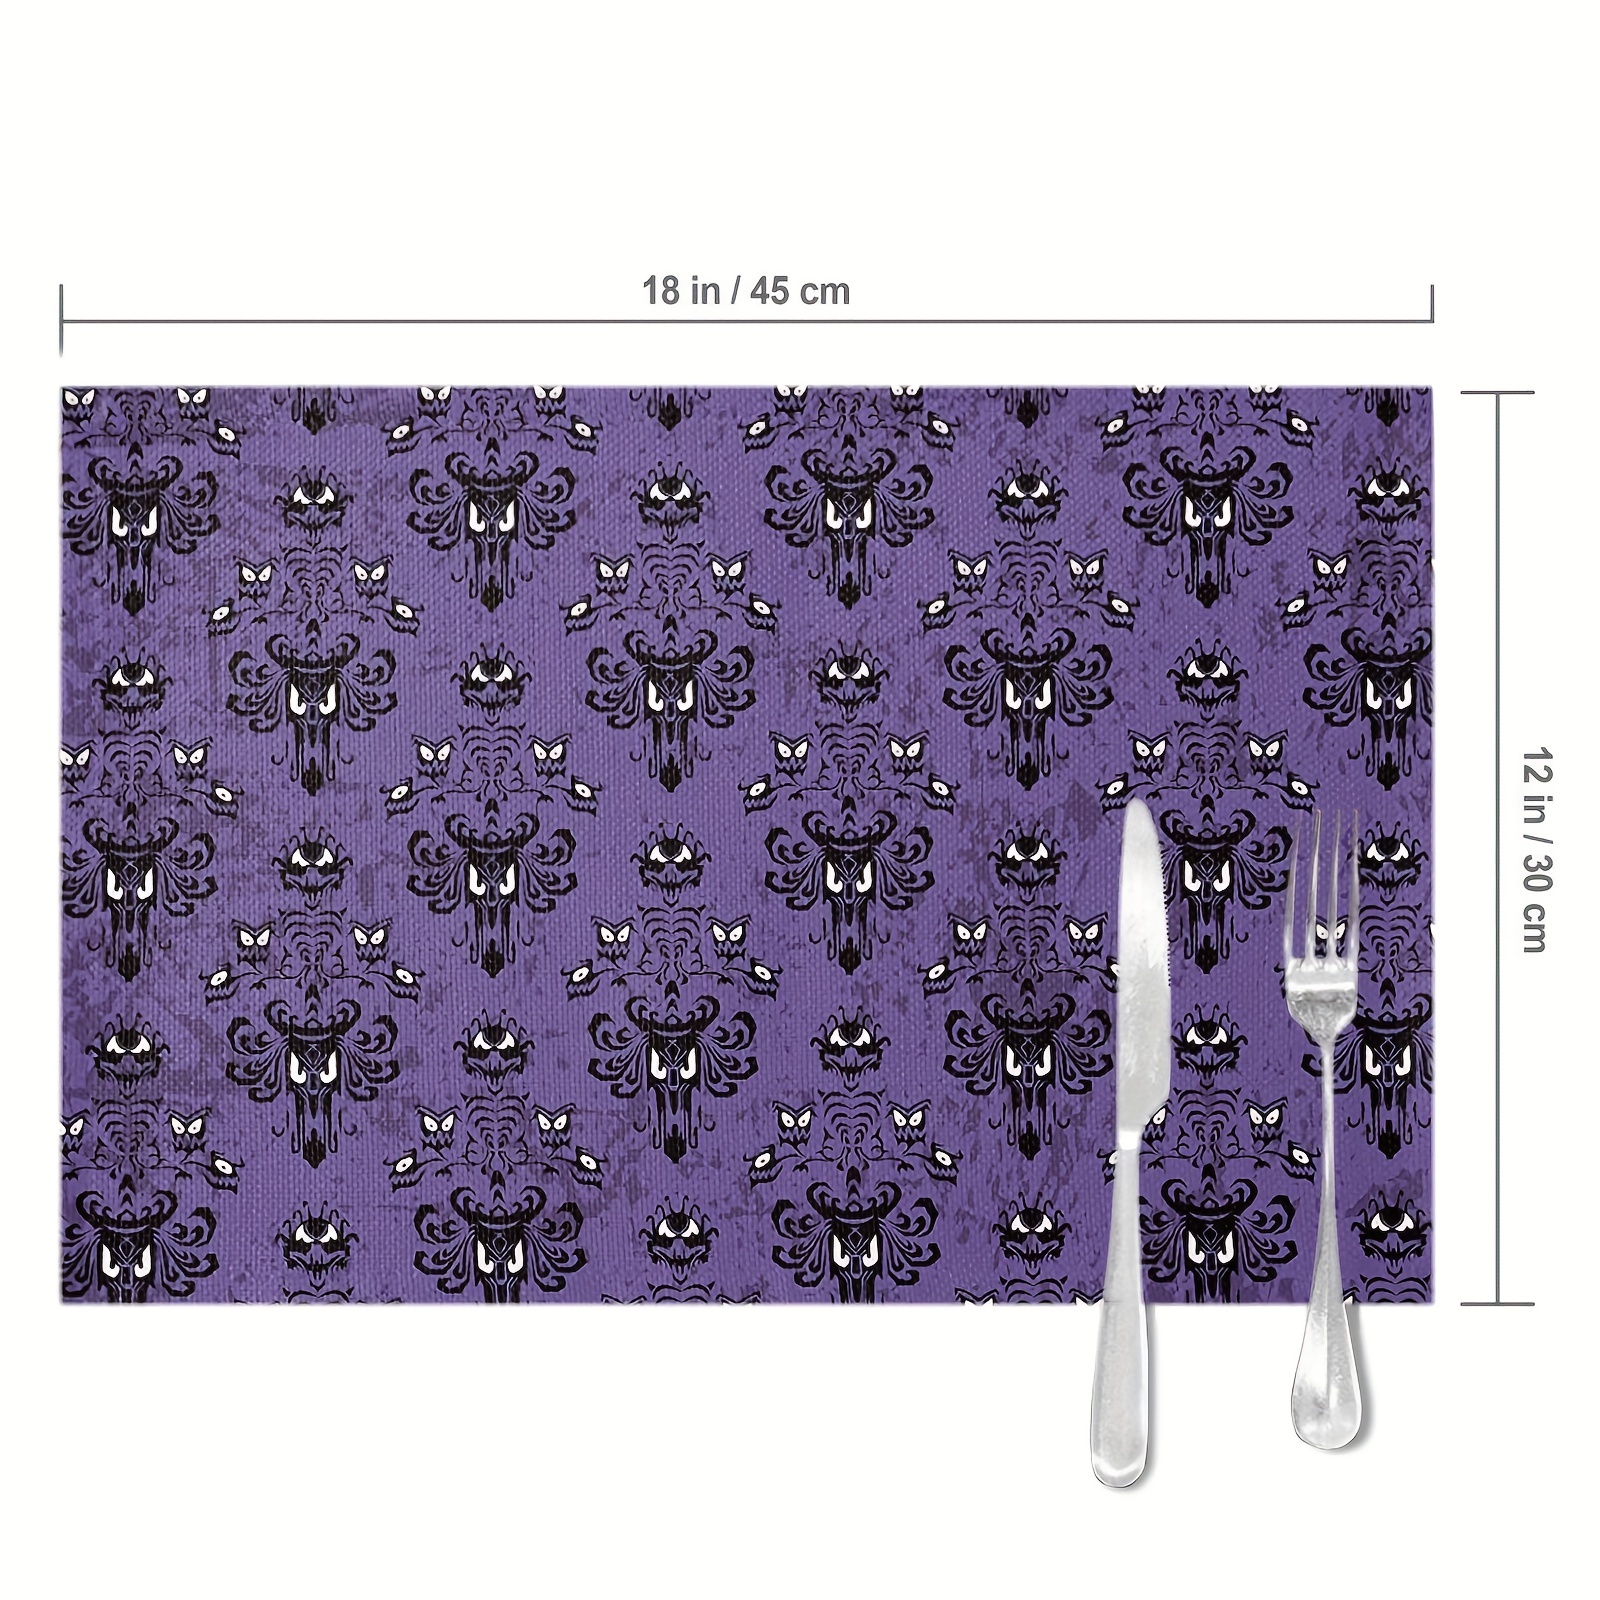 SPRING PARK 1Pc Placemats,Heat-Resistant Table Protector Washable